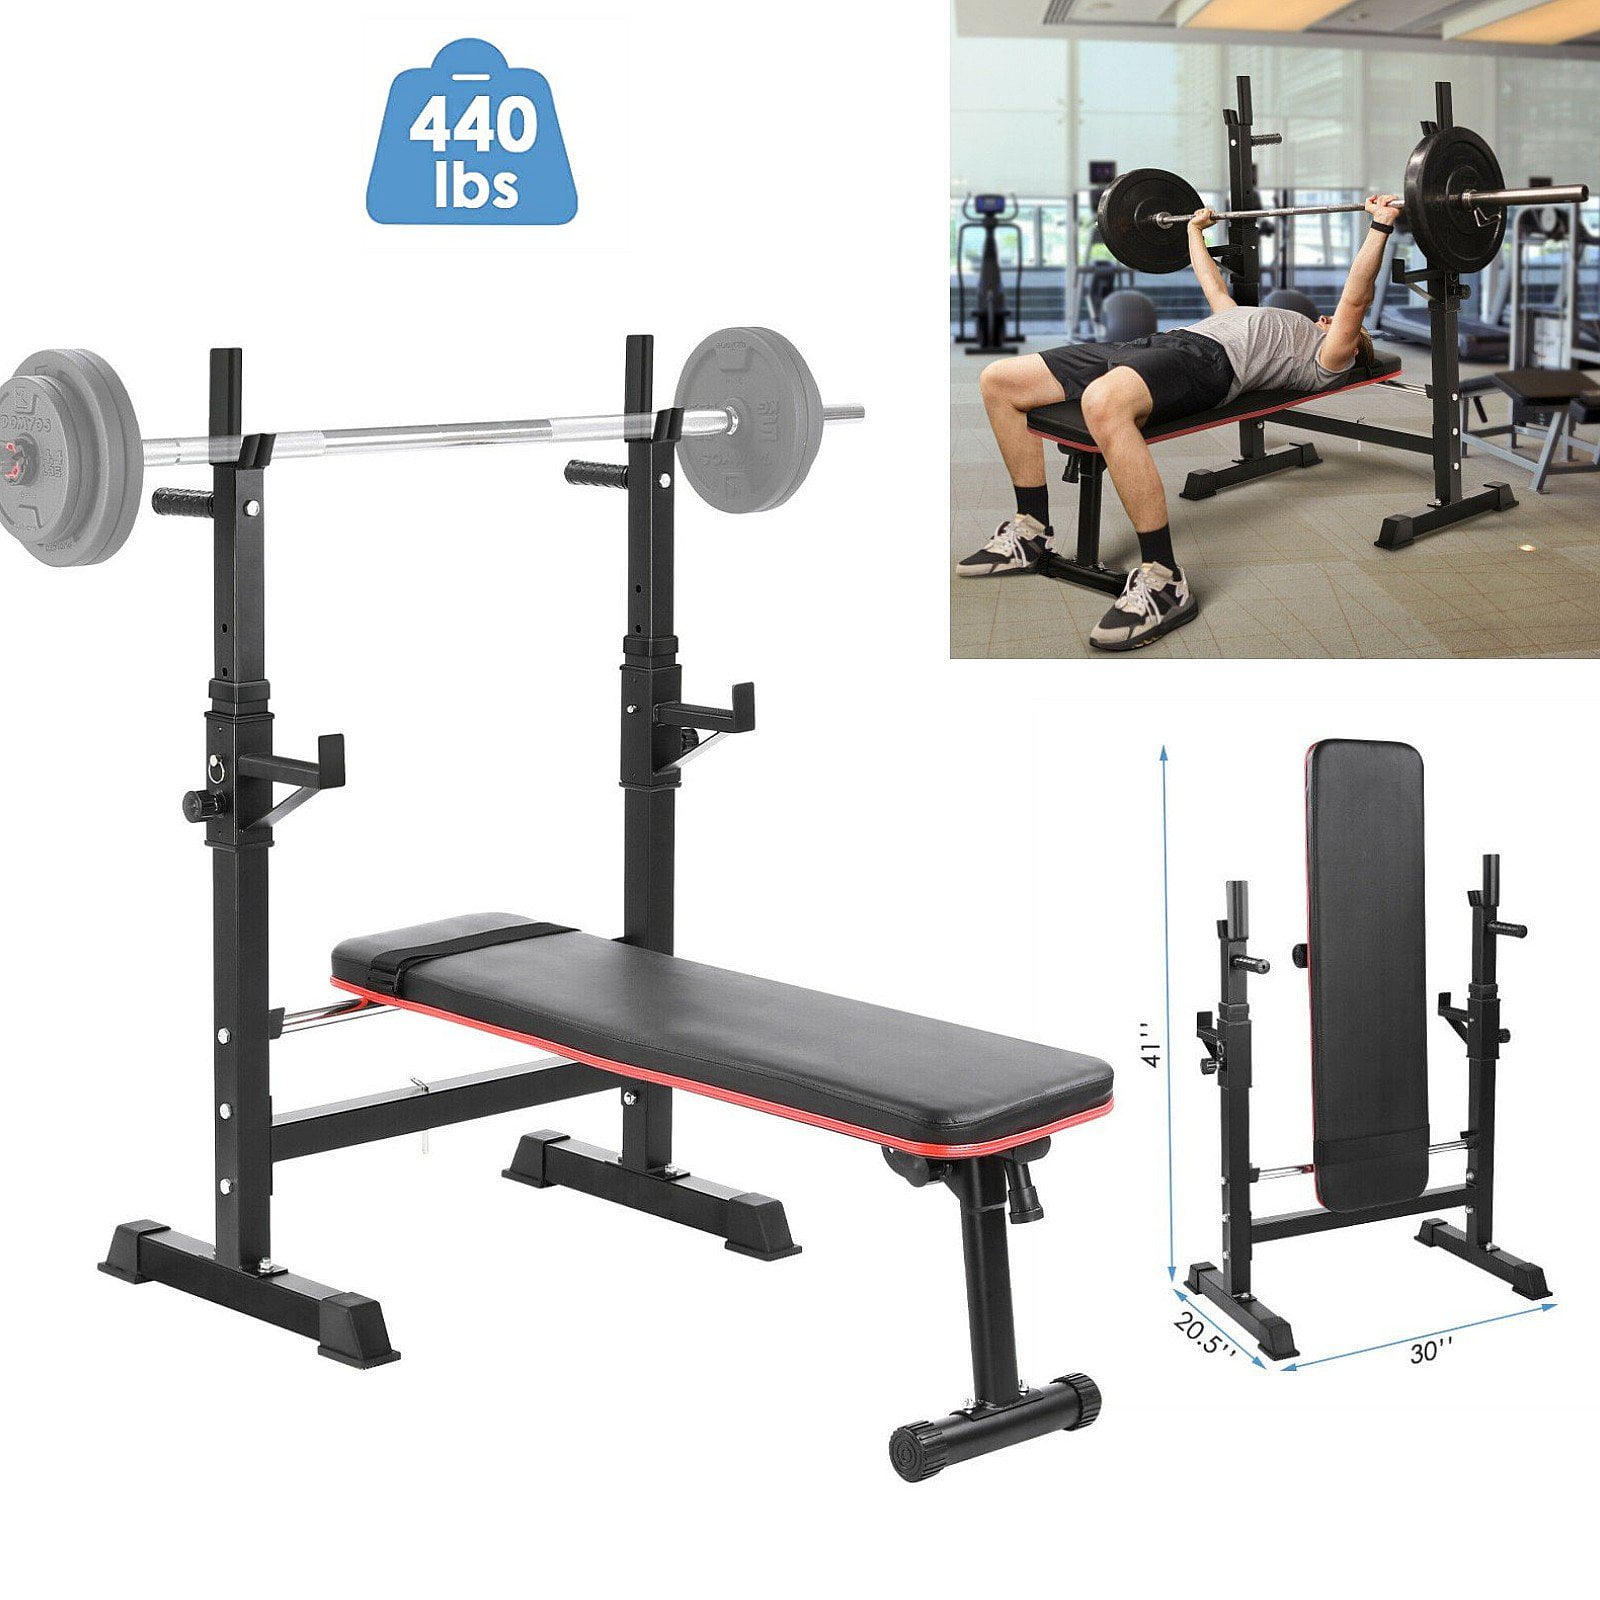 Compact and Save Room Adjustable Weight Bench with Rack Foldable Workout Exercise Fitness Bench and Squat Rack for Home Gym Full Body Multi-Function Workout 